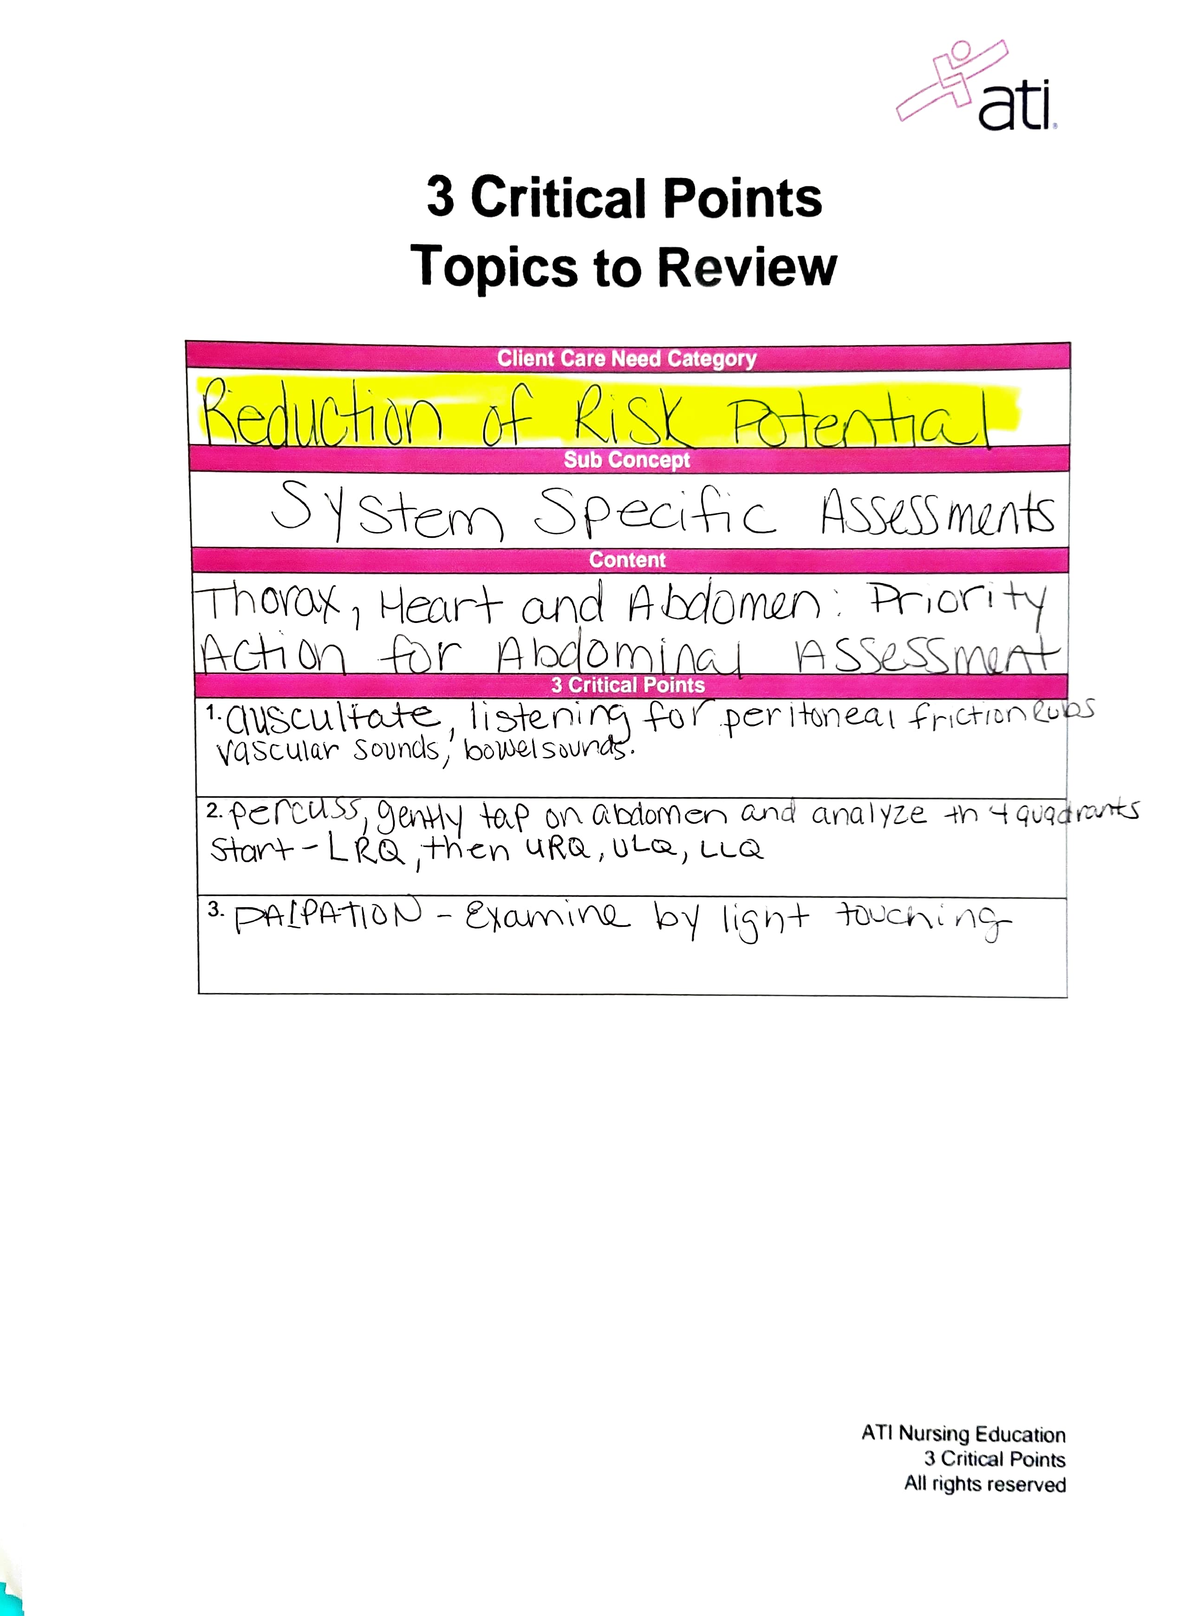 ATI Critical Points at 3 Critical PointsS Topics to Review